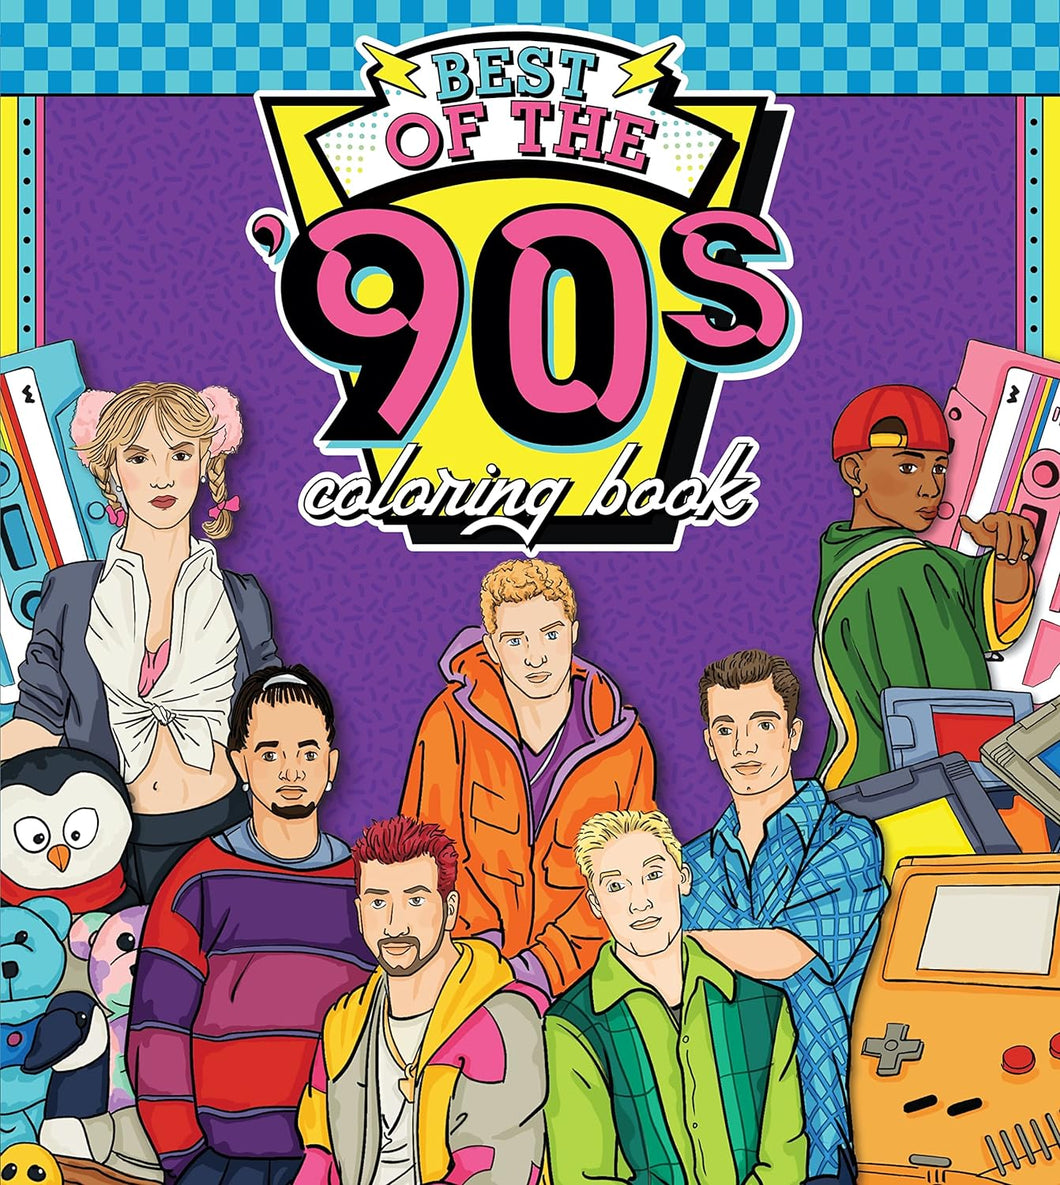 WALTER FOSTER - Decades Coloring Books - 90s